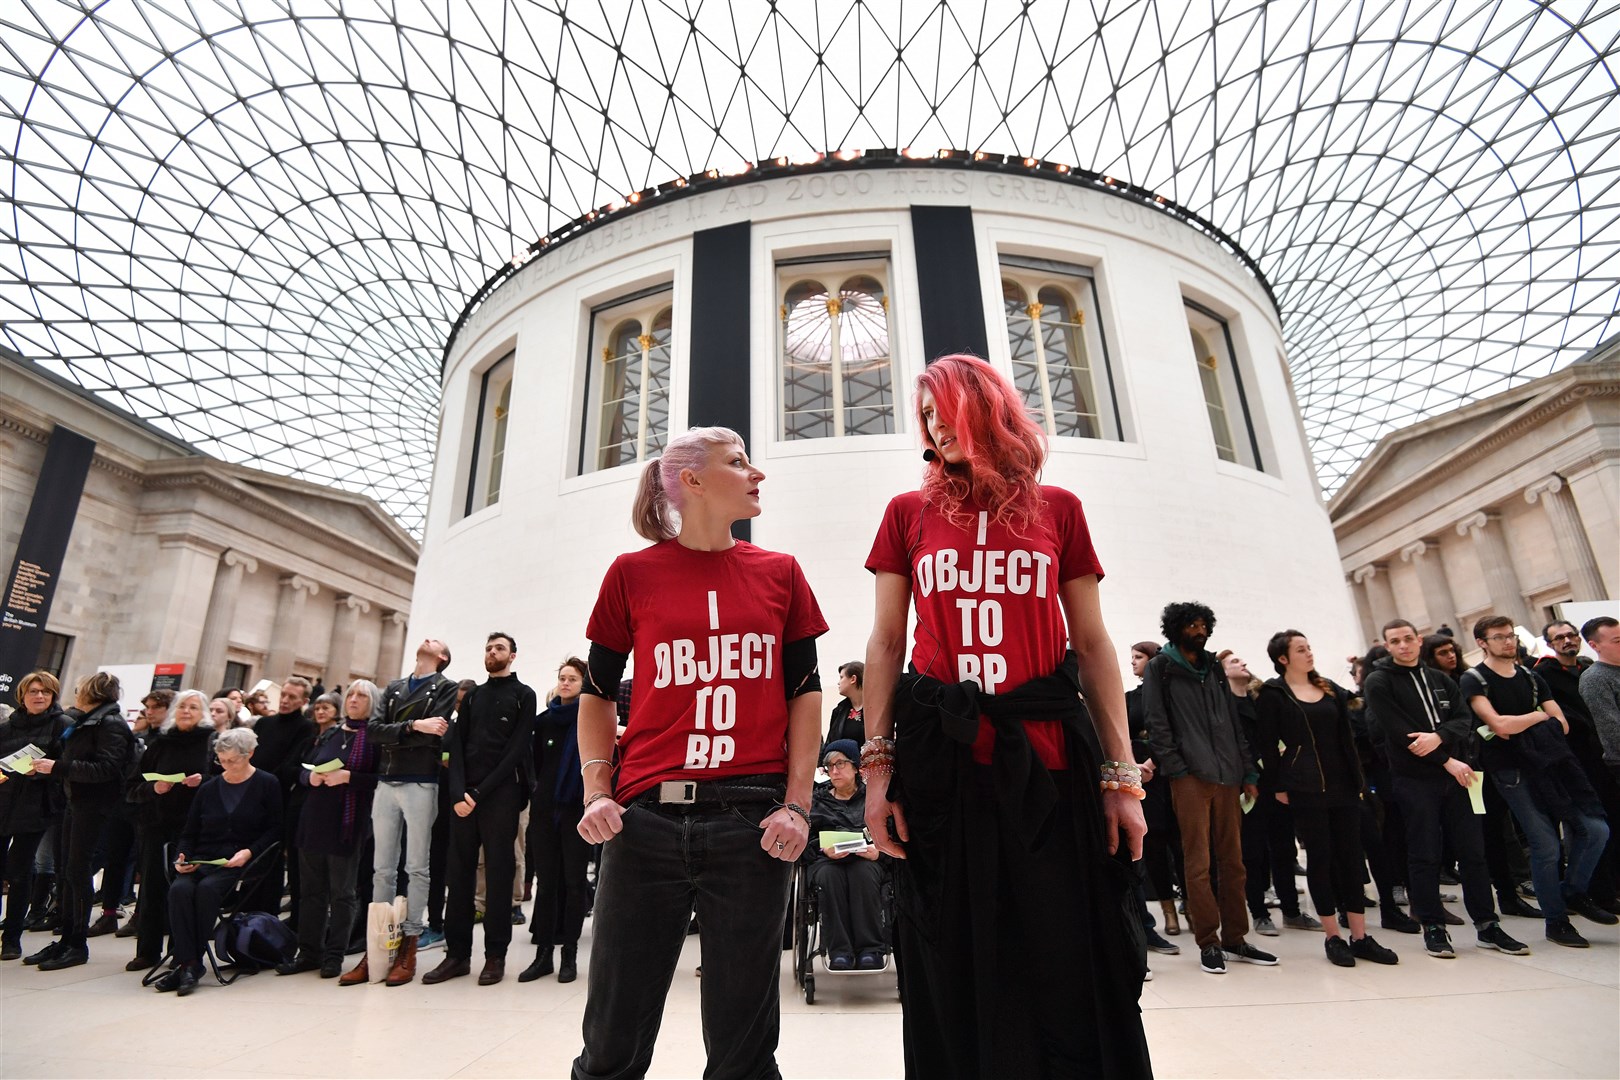 Activists from the pressure group BP or not BP? protest in the Great Court of the British Museum in London (John Stillwell/PA)